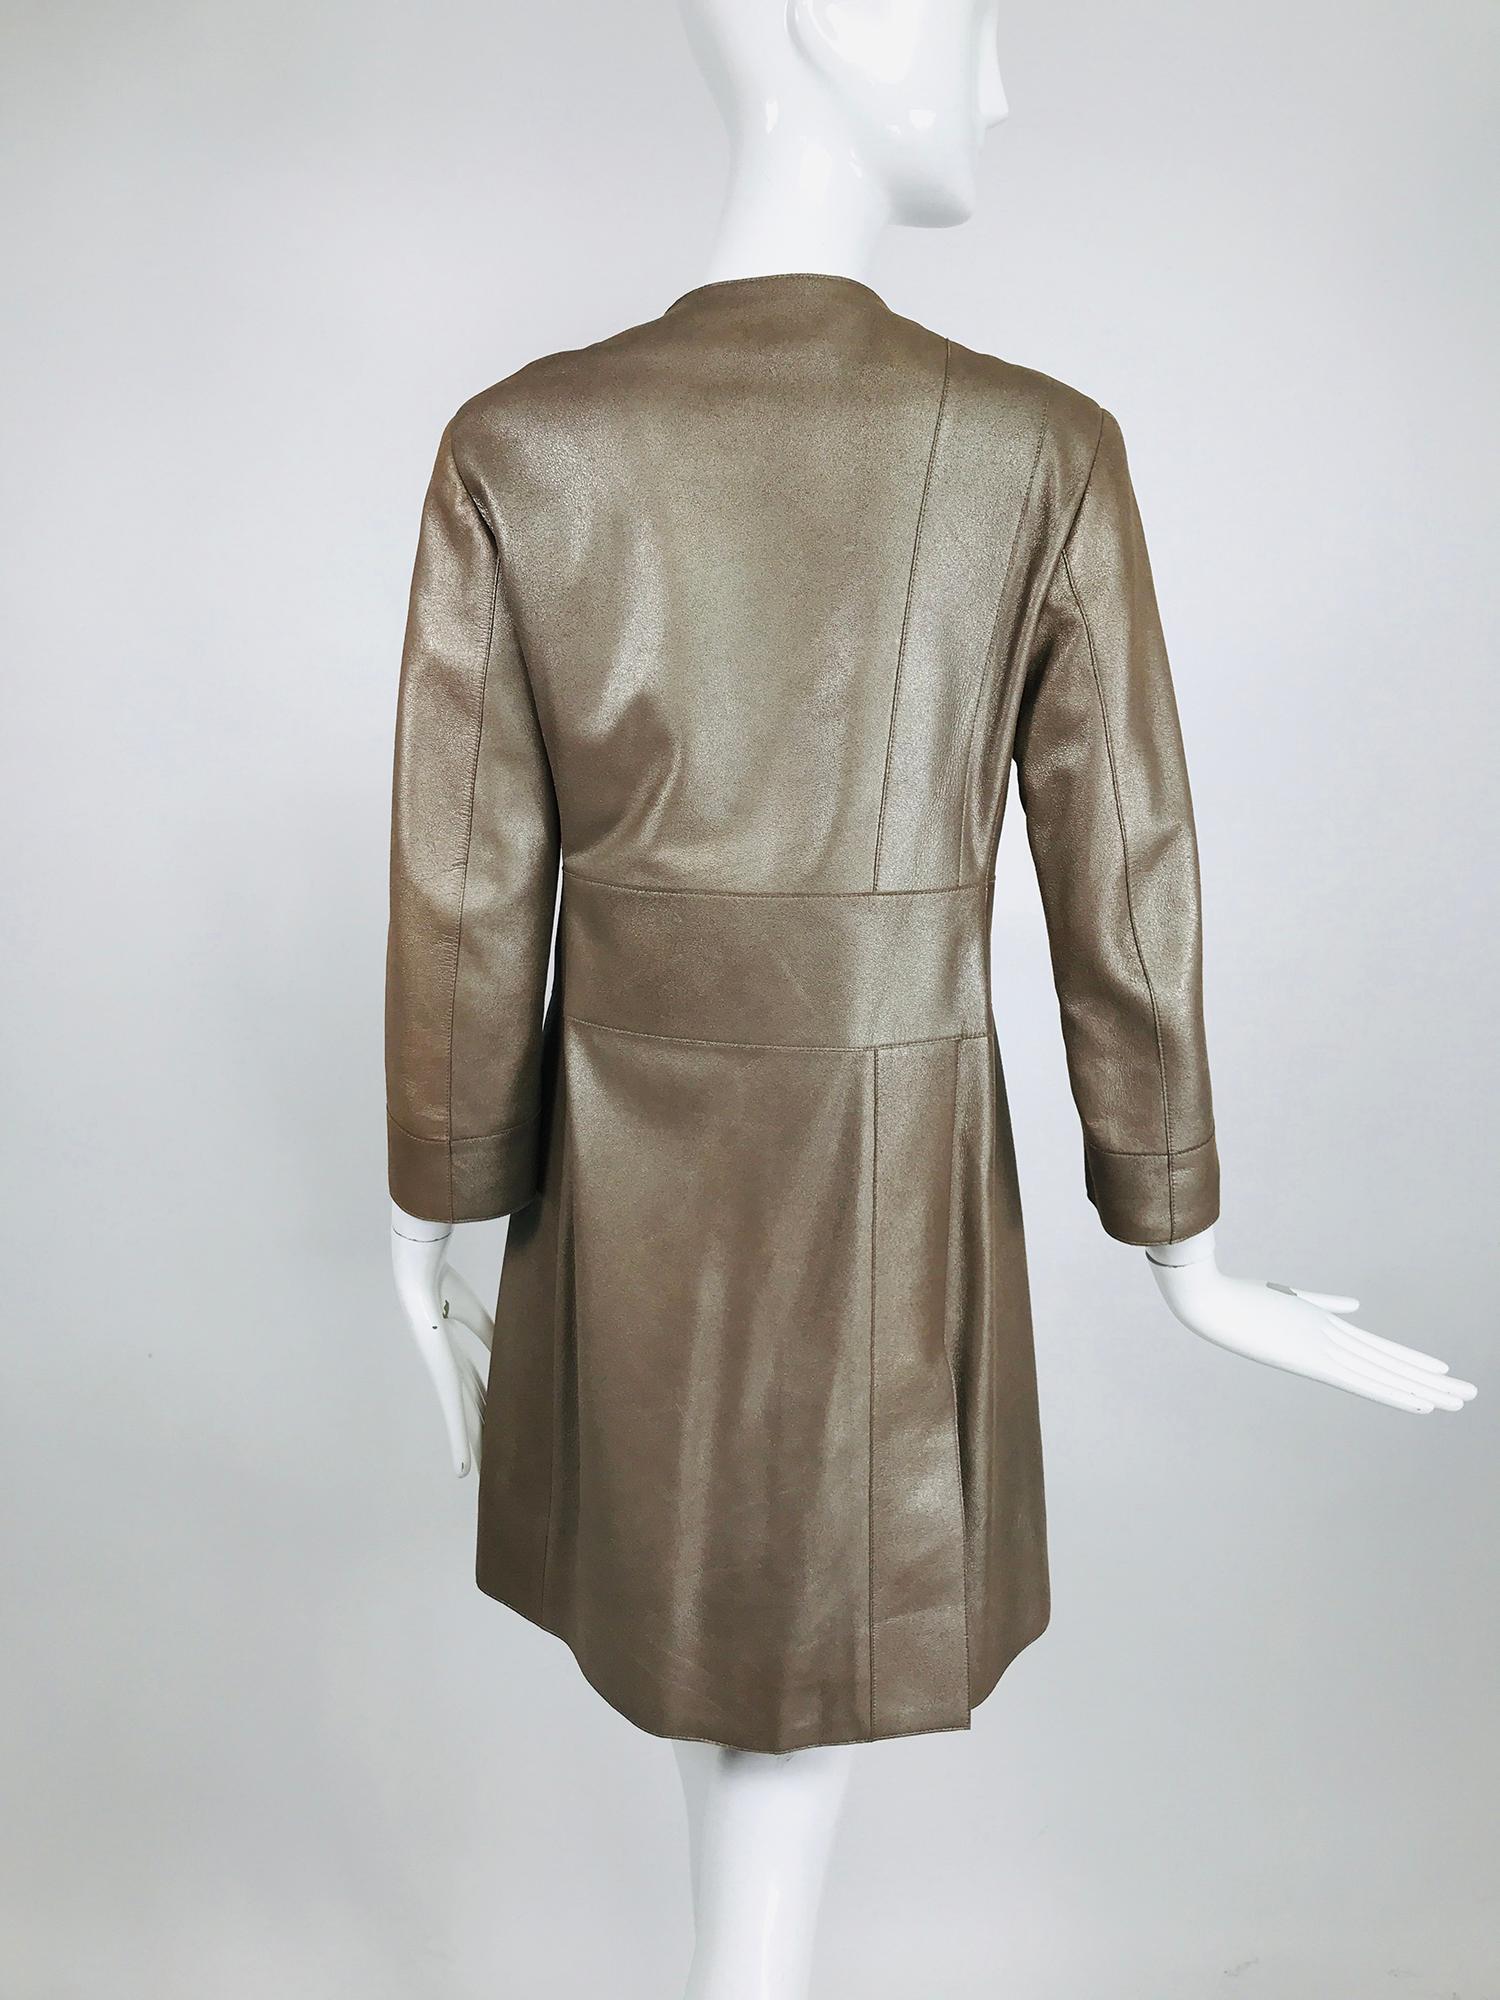 Akris Bronze Gold Lamb Suede Coat  In Excellent Condition For Sale In West Palm Beach, FL